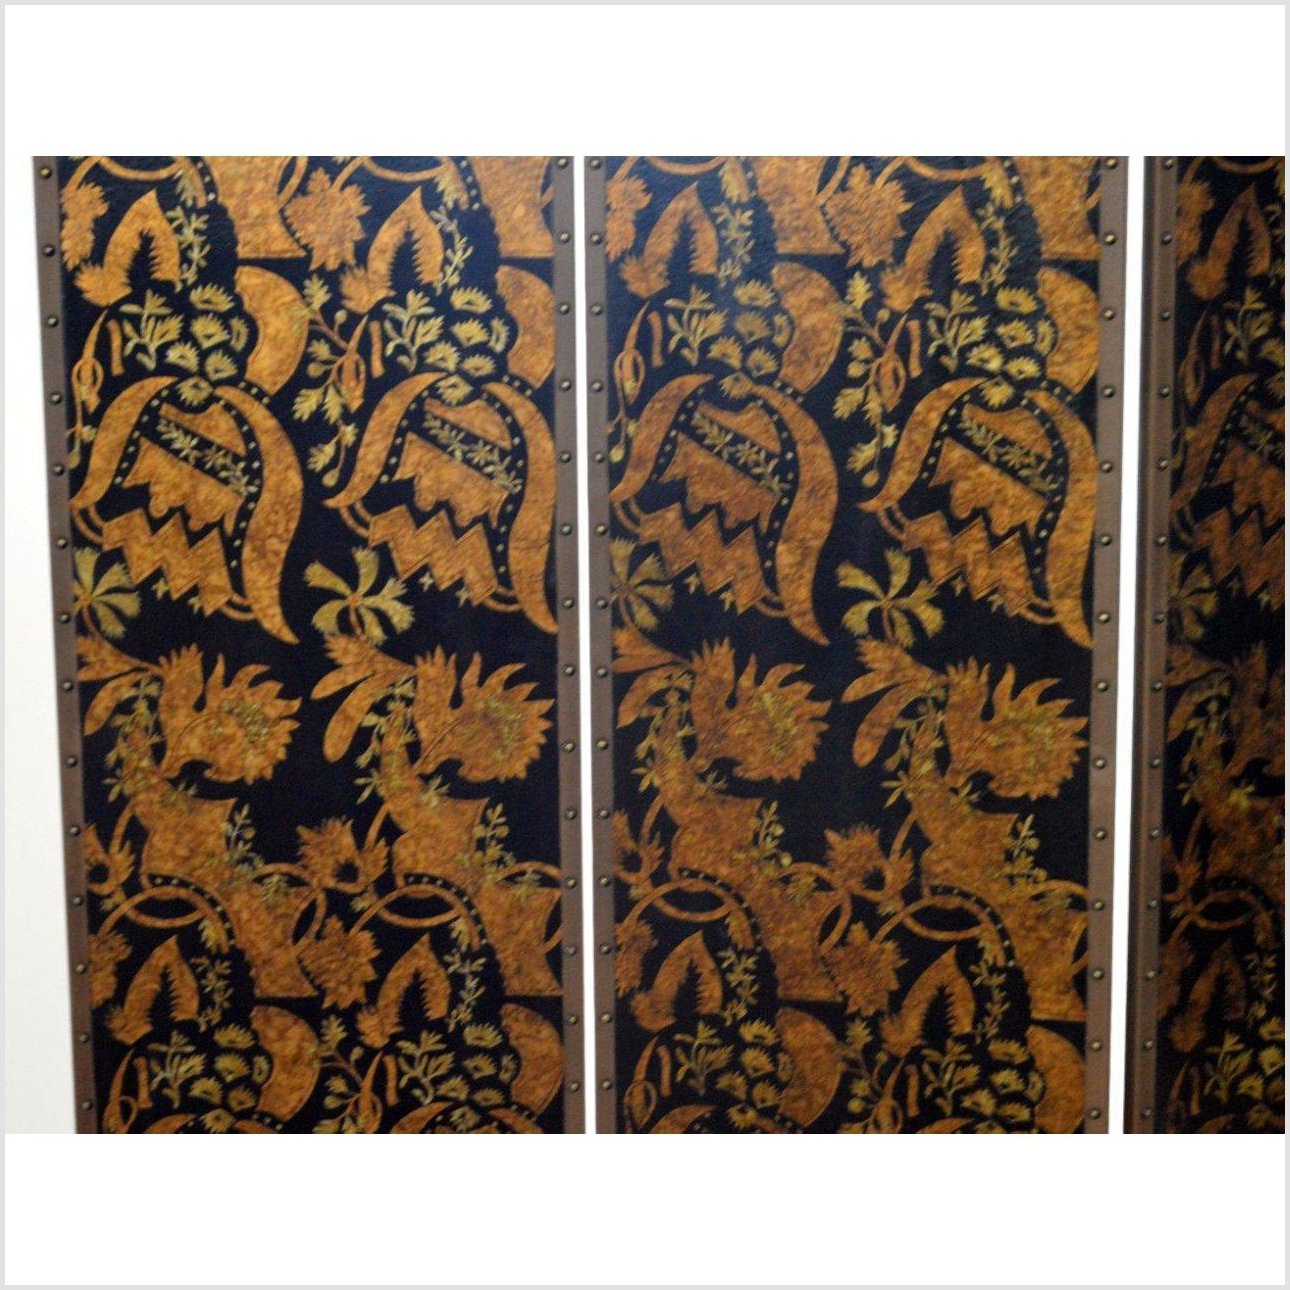 Black 4-Panel Screen with Gold Repetitive Pattern Design-YN2835-5. Asian & Chinese Furniture, Art, Antiques, Vintage Home Décor for sale at FEA Home